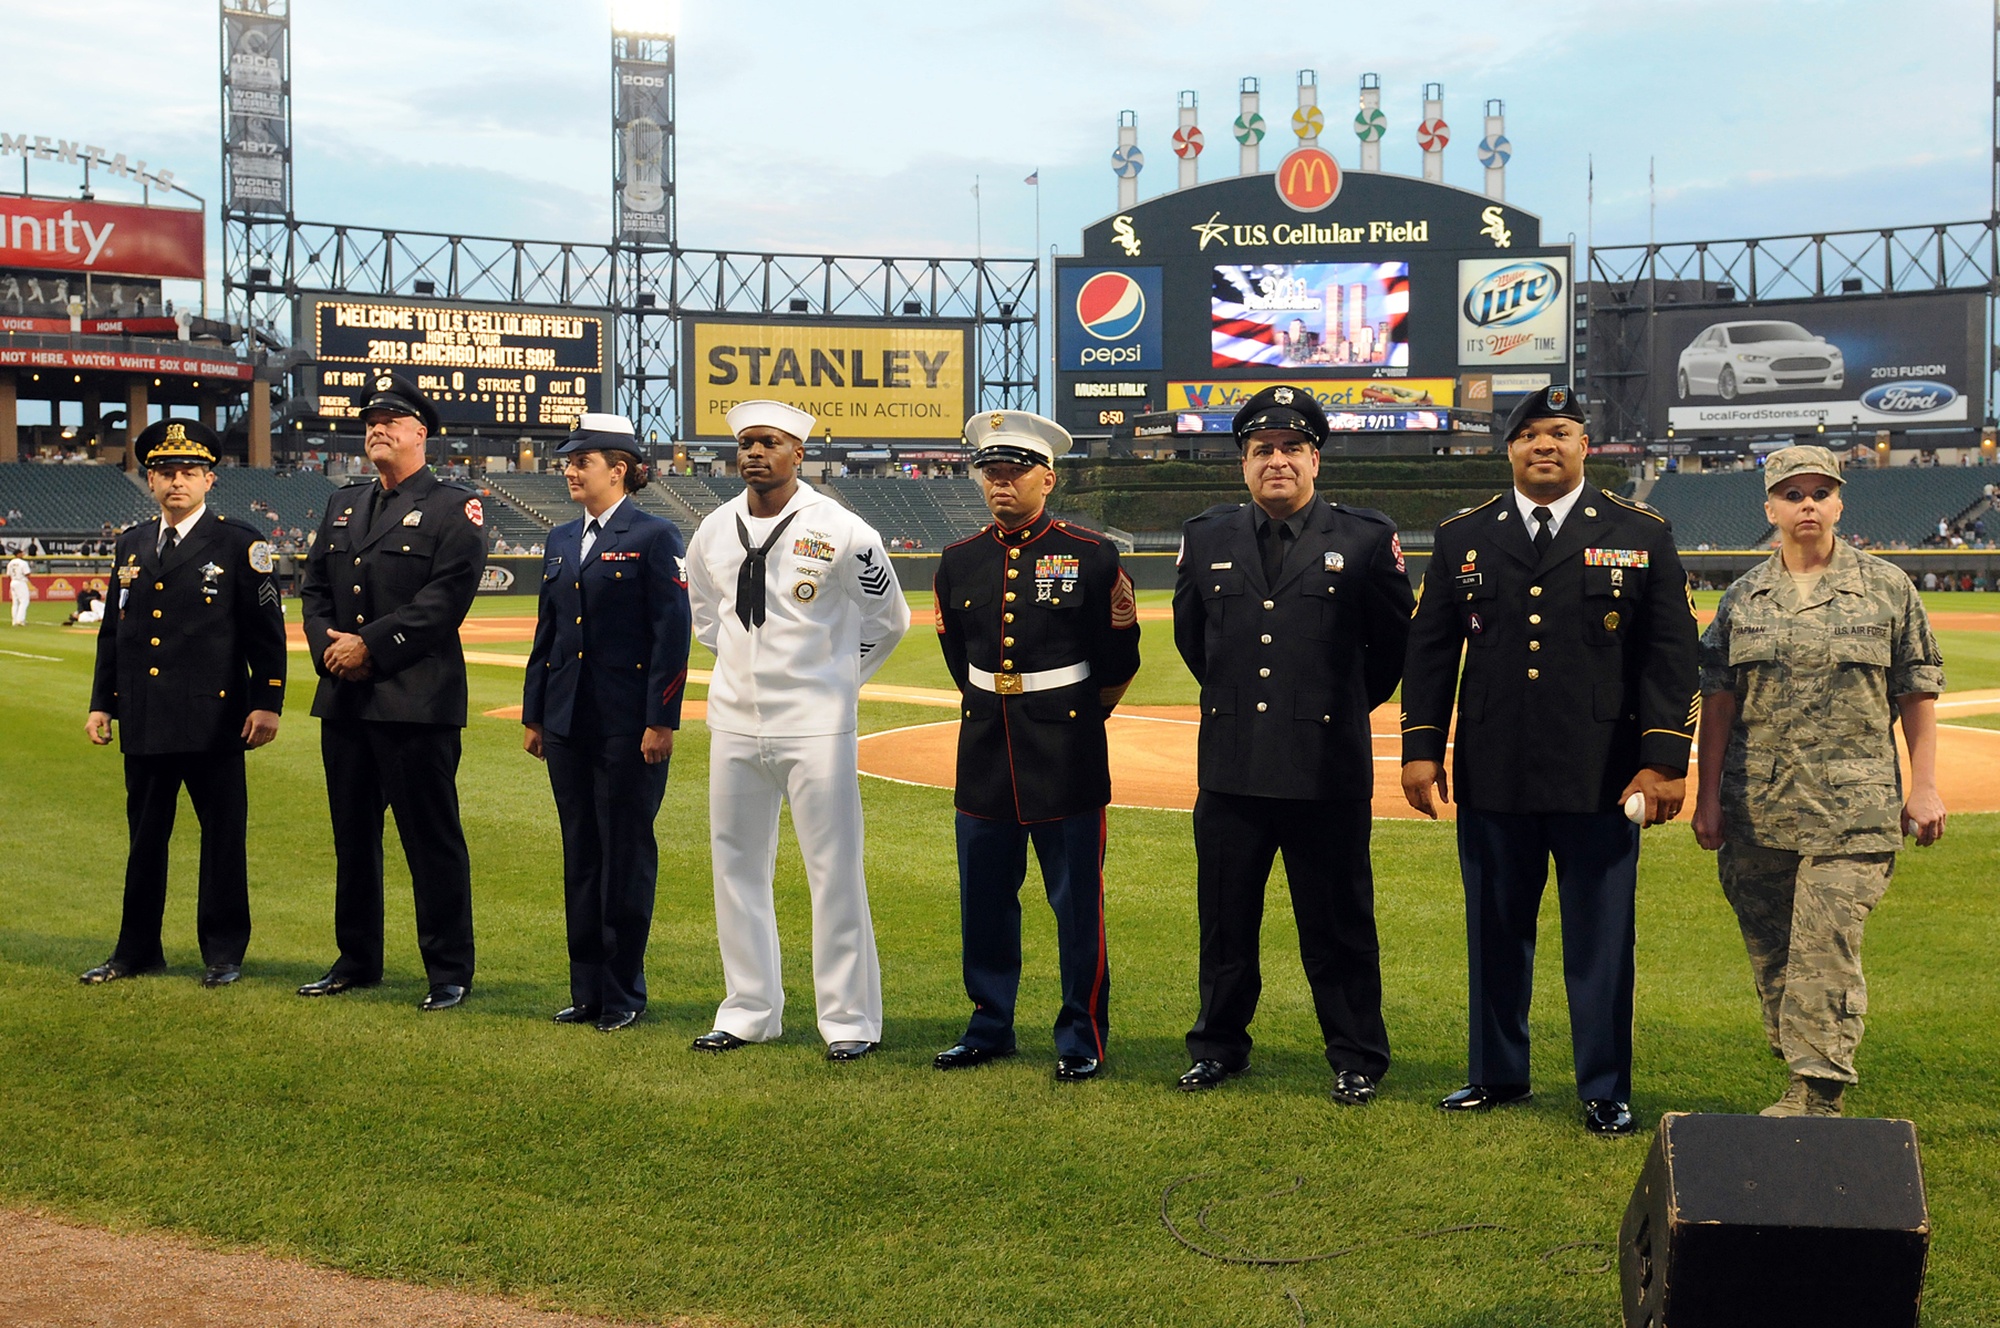 DVIDS - Images - Chicago based service-members take the field at Chicago White  Sox Fourth of July game [Image 1 of 3]